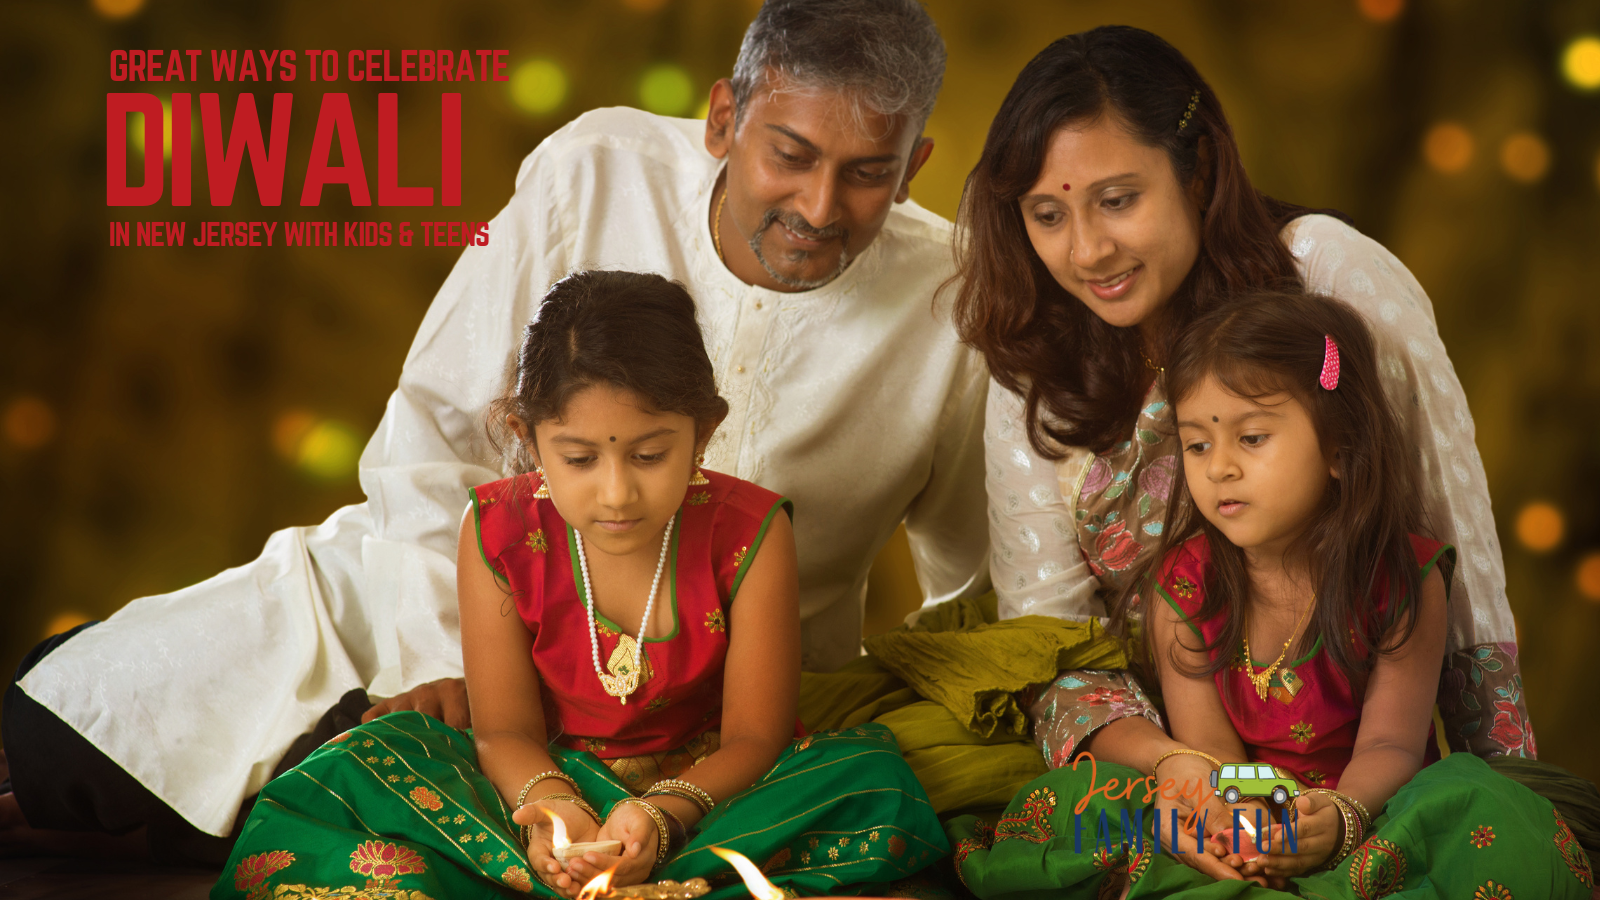 Great Ways to Celebrate Diwali in New Jersey with Kids and Teens Twitter size image